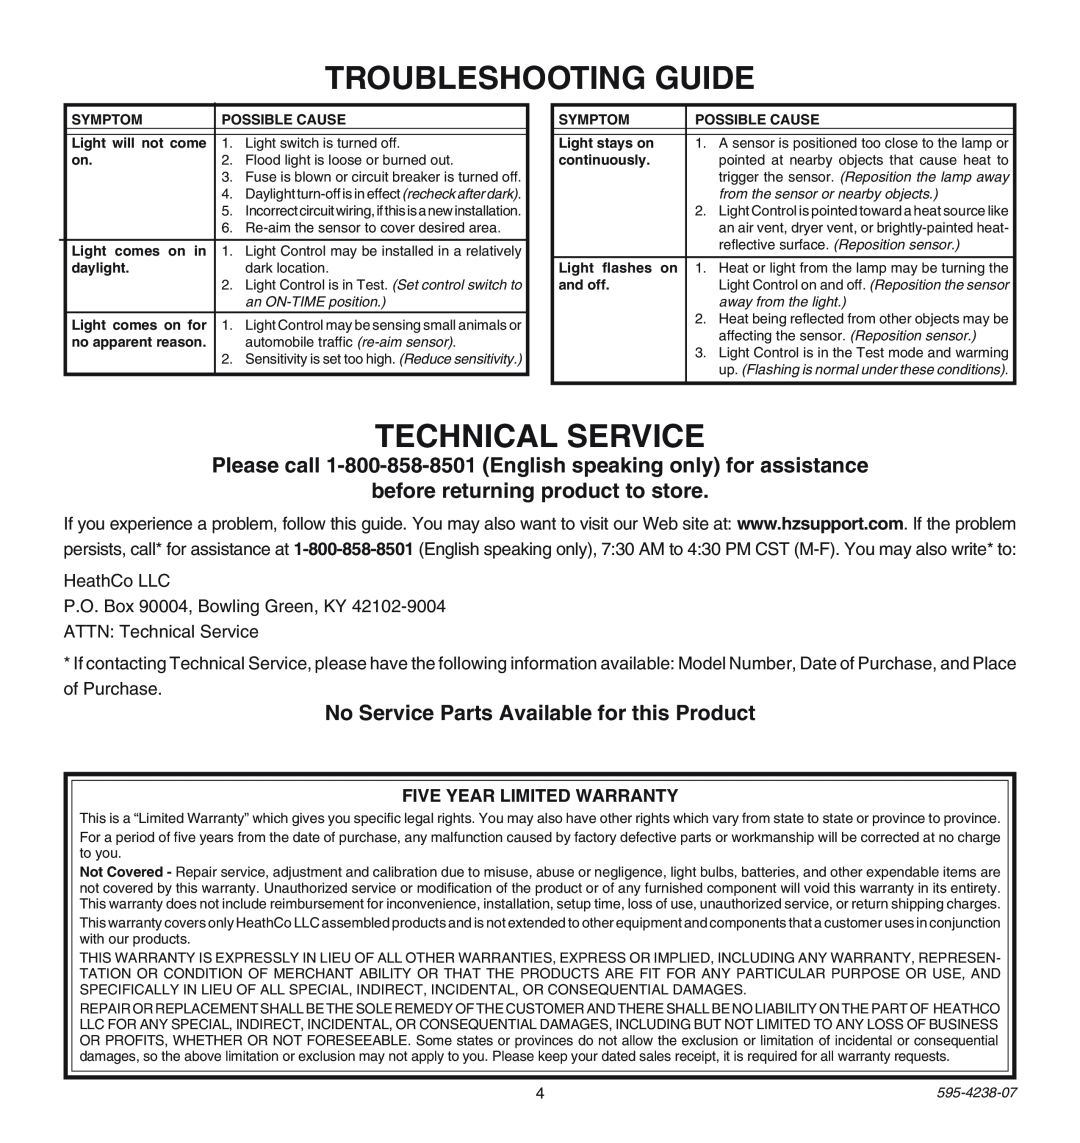 Heath Zenith SL-5211 manual Troubleshooting Guide, Technical Service, before returning product to store 